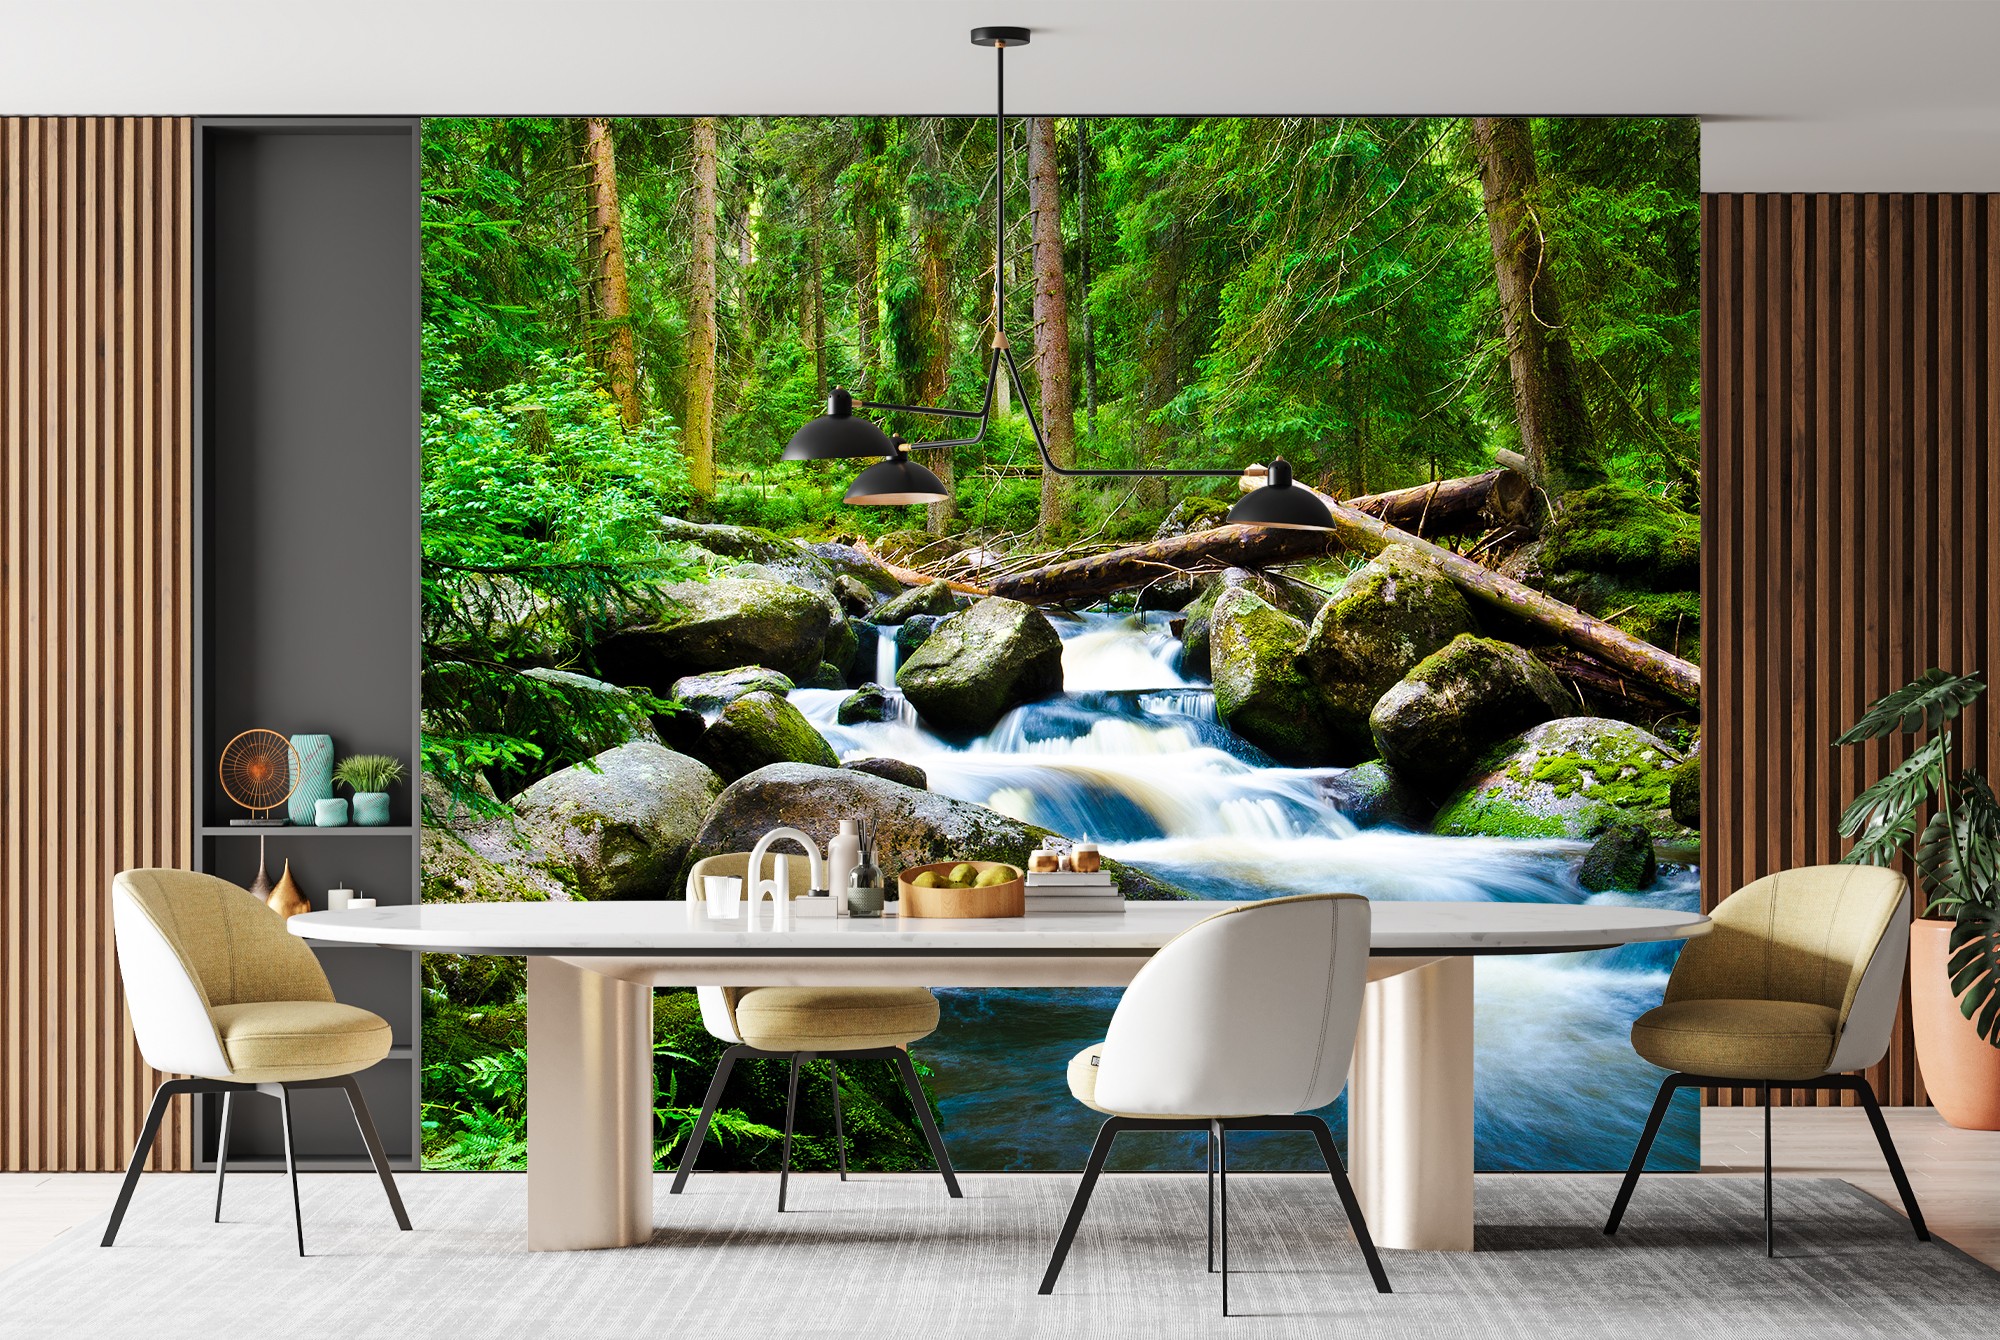 Removable Designer Wall Decor Calm River Wallpaper Mural,Nature Rivers & Lakes Green Self-Adhesive Peel And Stick 3D Wall Decor